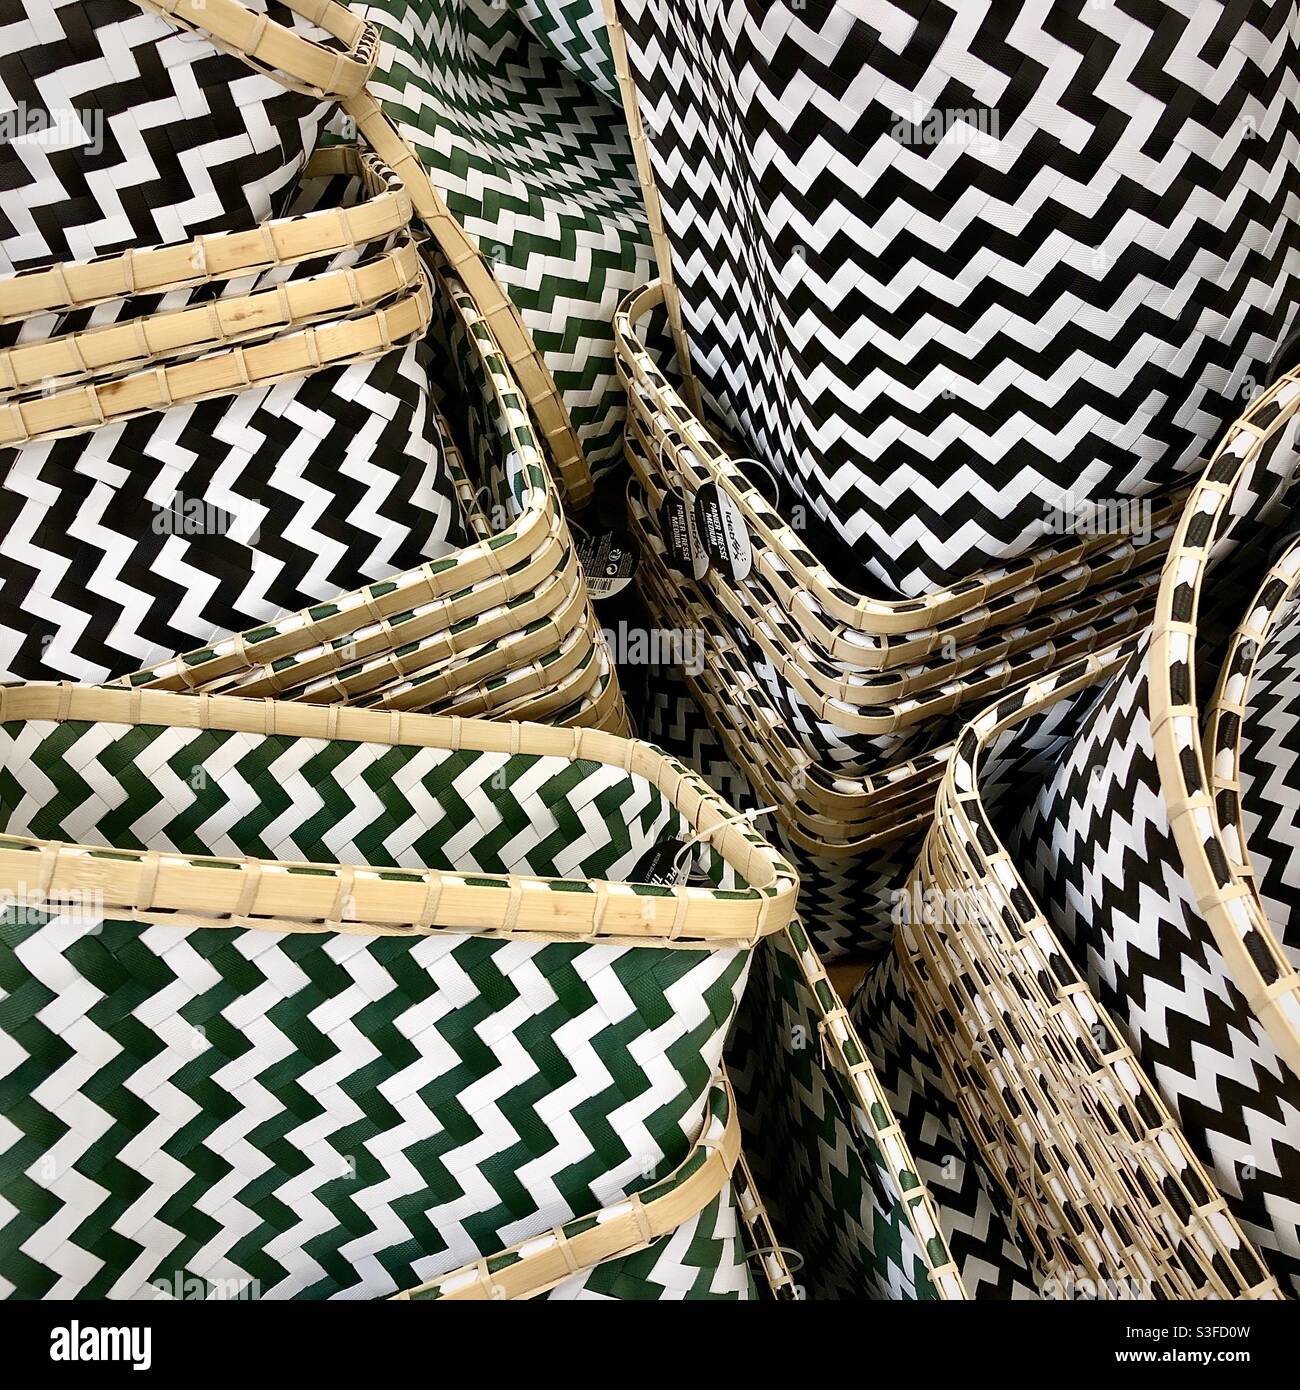 Stack of open-topped receptacles or boxes with graphic zig-zag pattern decoration. Stock Photo